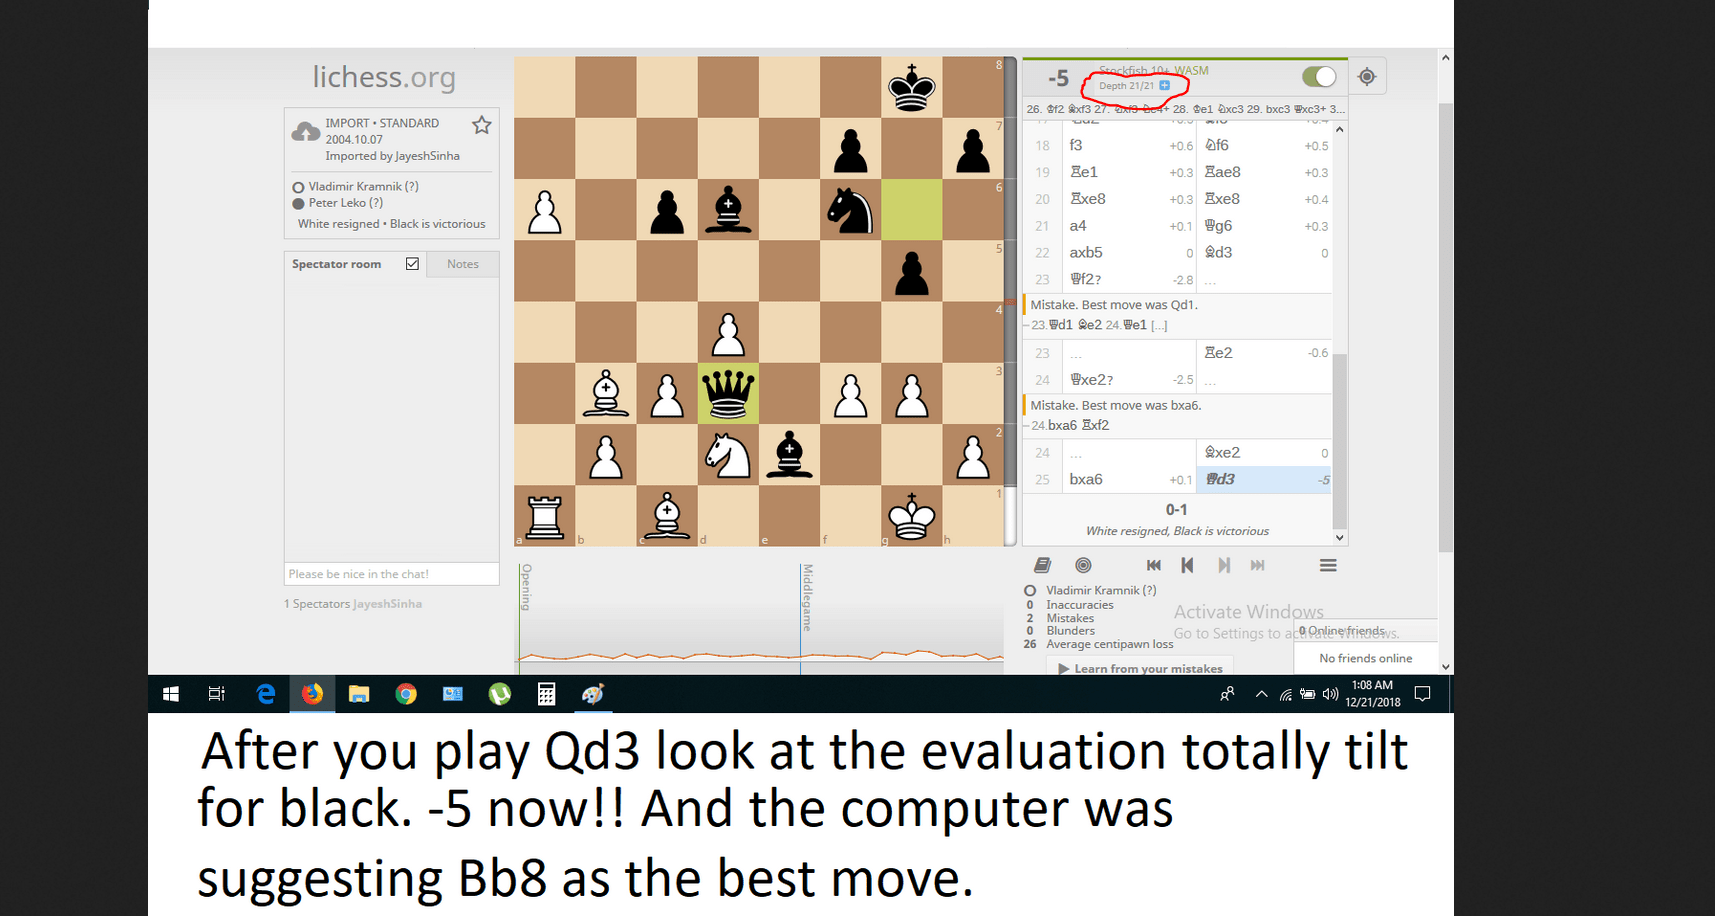 1.d4, best by test (AlphaZero) • page 1/2 • General Chess Discussion •